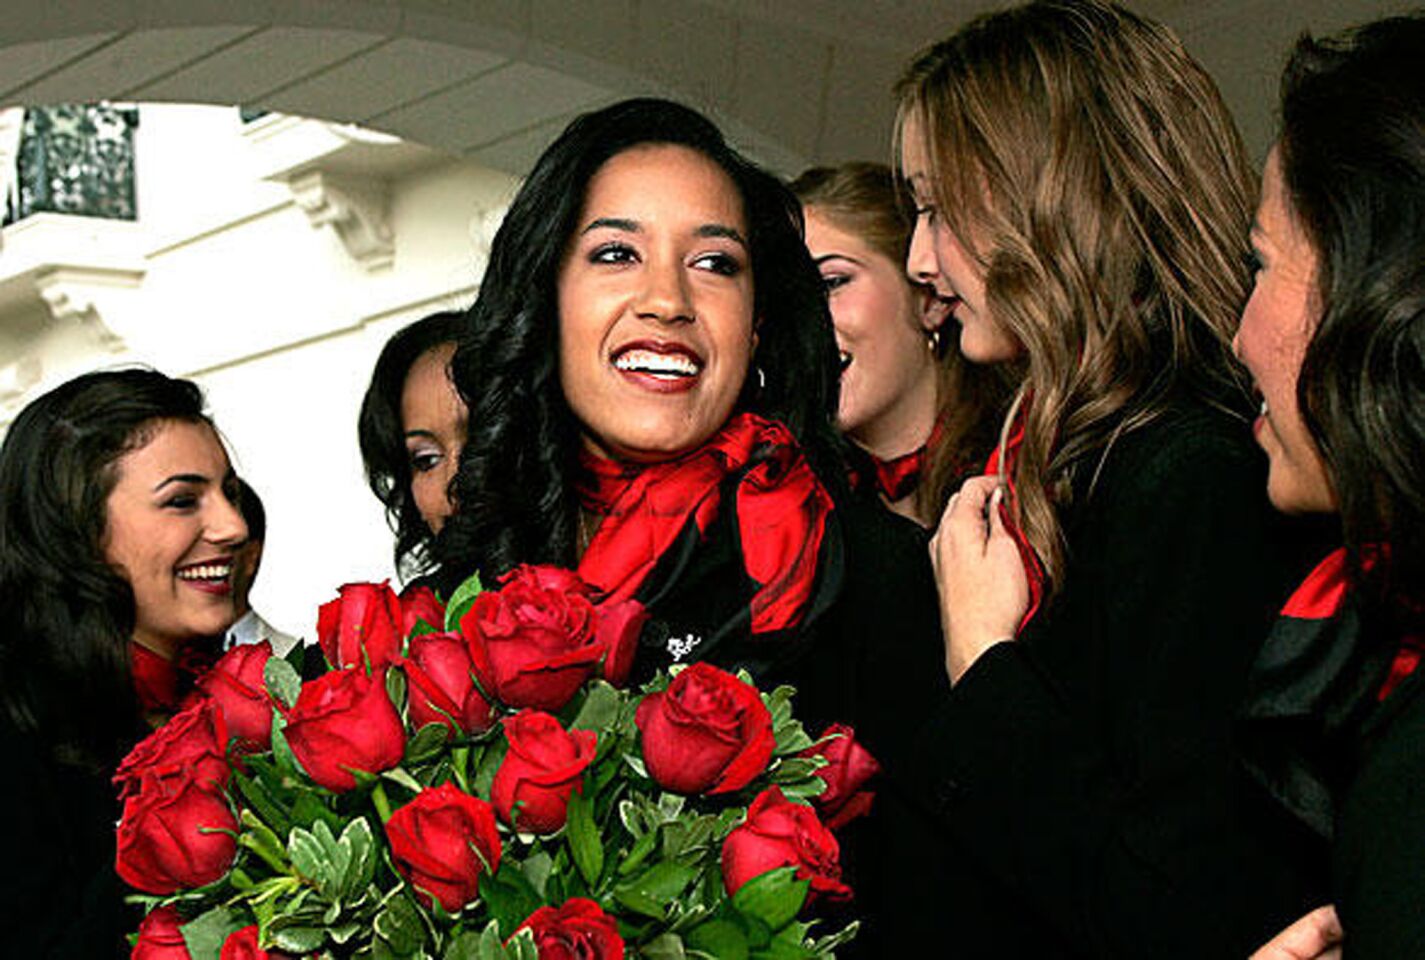 Camille Clark is congratulated by the princesses after being named rose queen for the 2006 tournament.